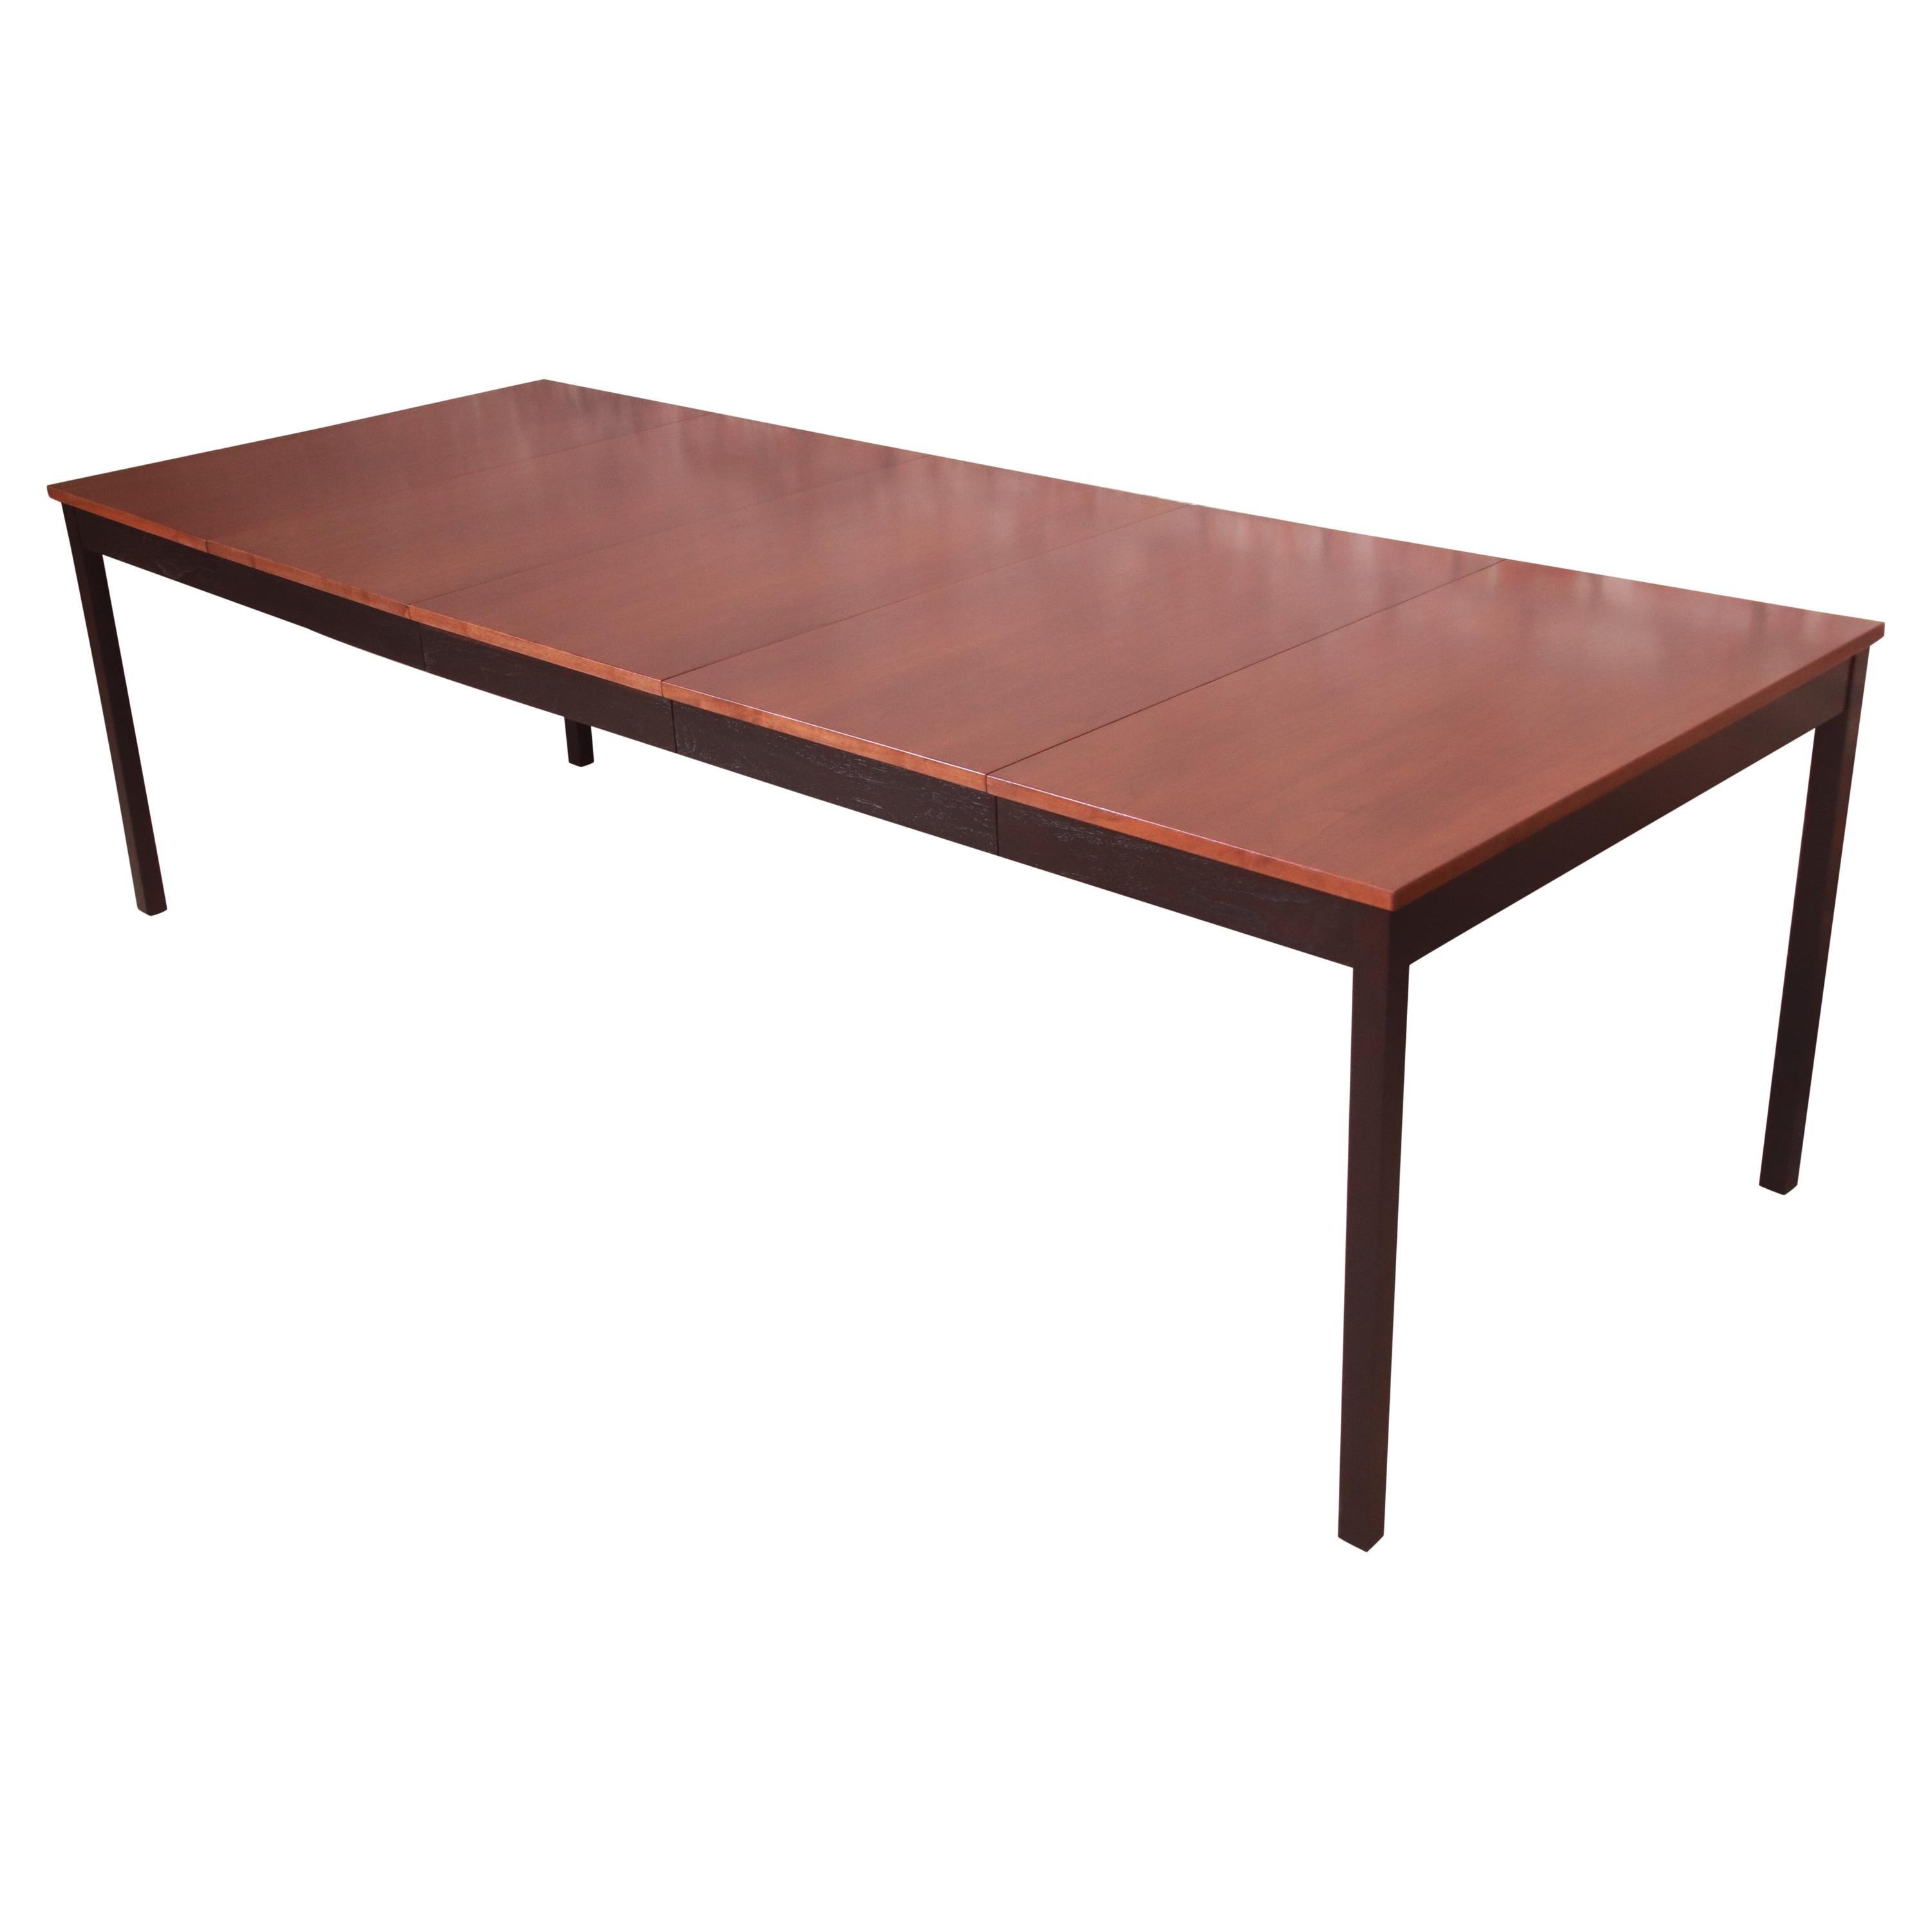 Milo Baughman for Directional Mid-Century Modern Walnut Dining Table, Refinished